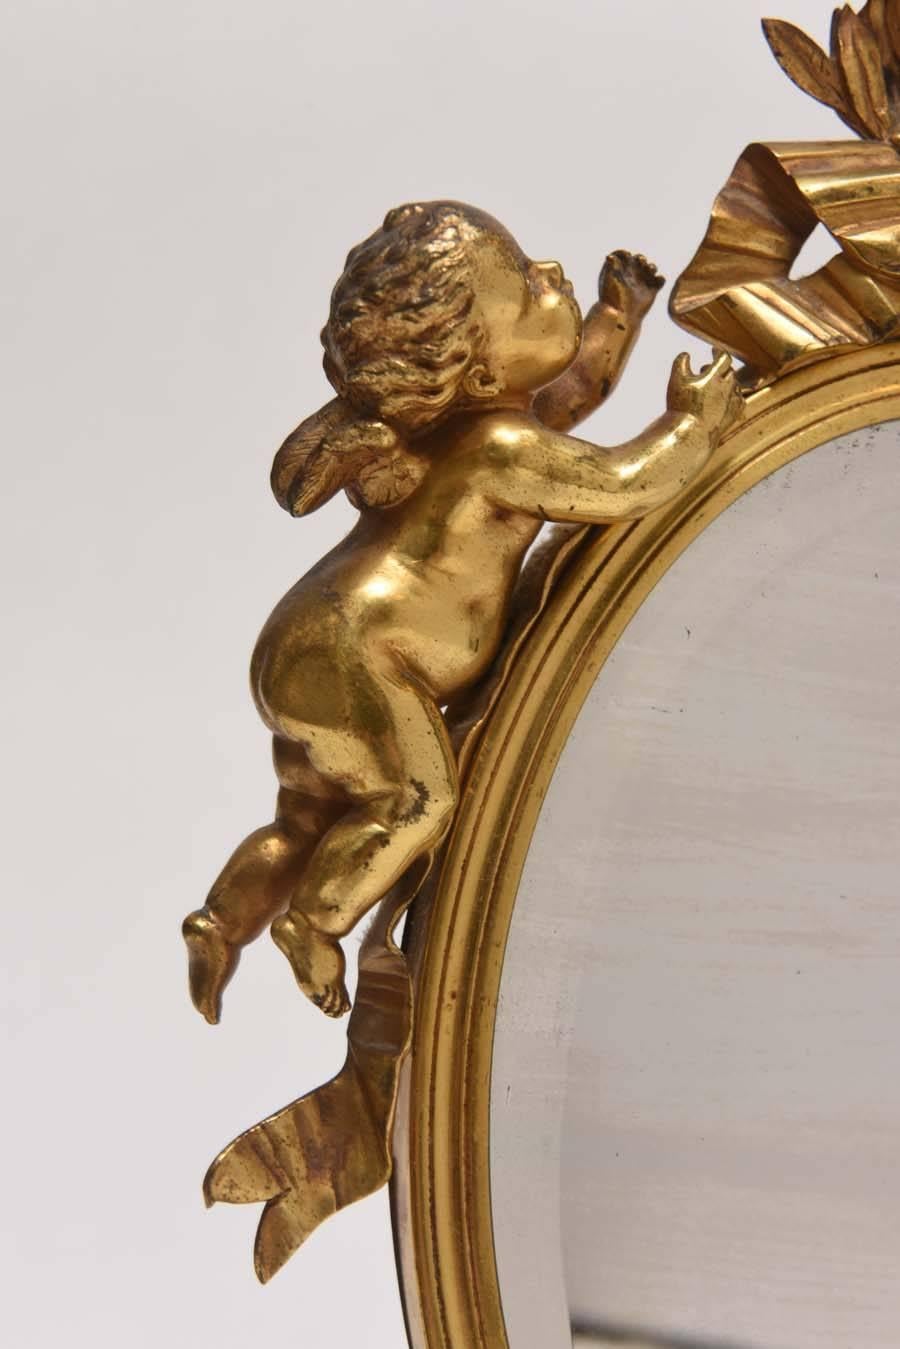 Very sweet Dore bronze vanity mirror adorned with garlands and putti on a Carnelian marble base.